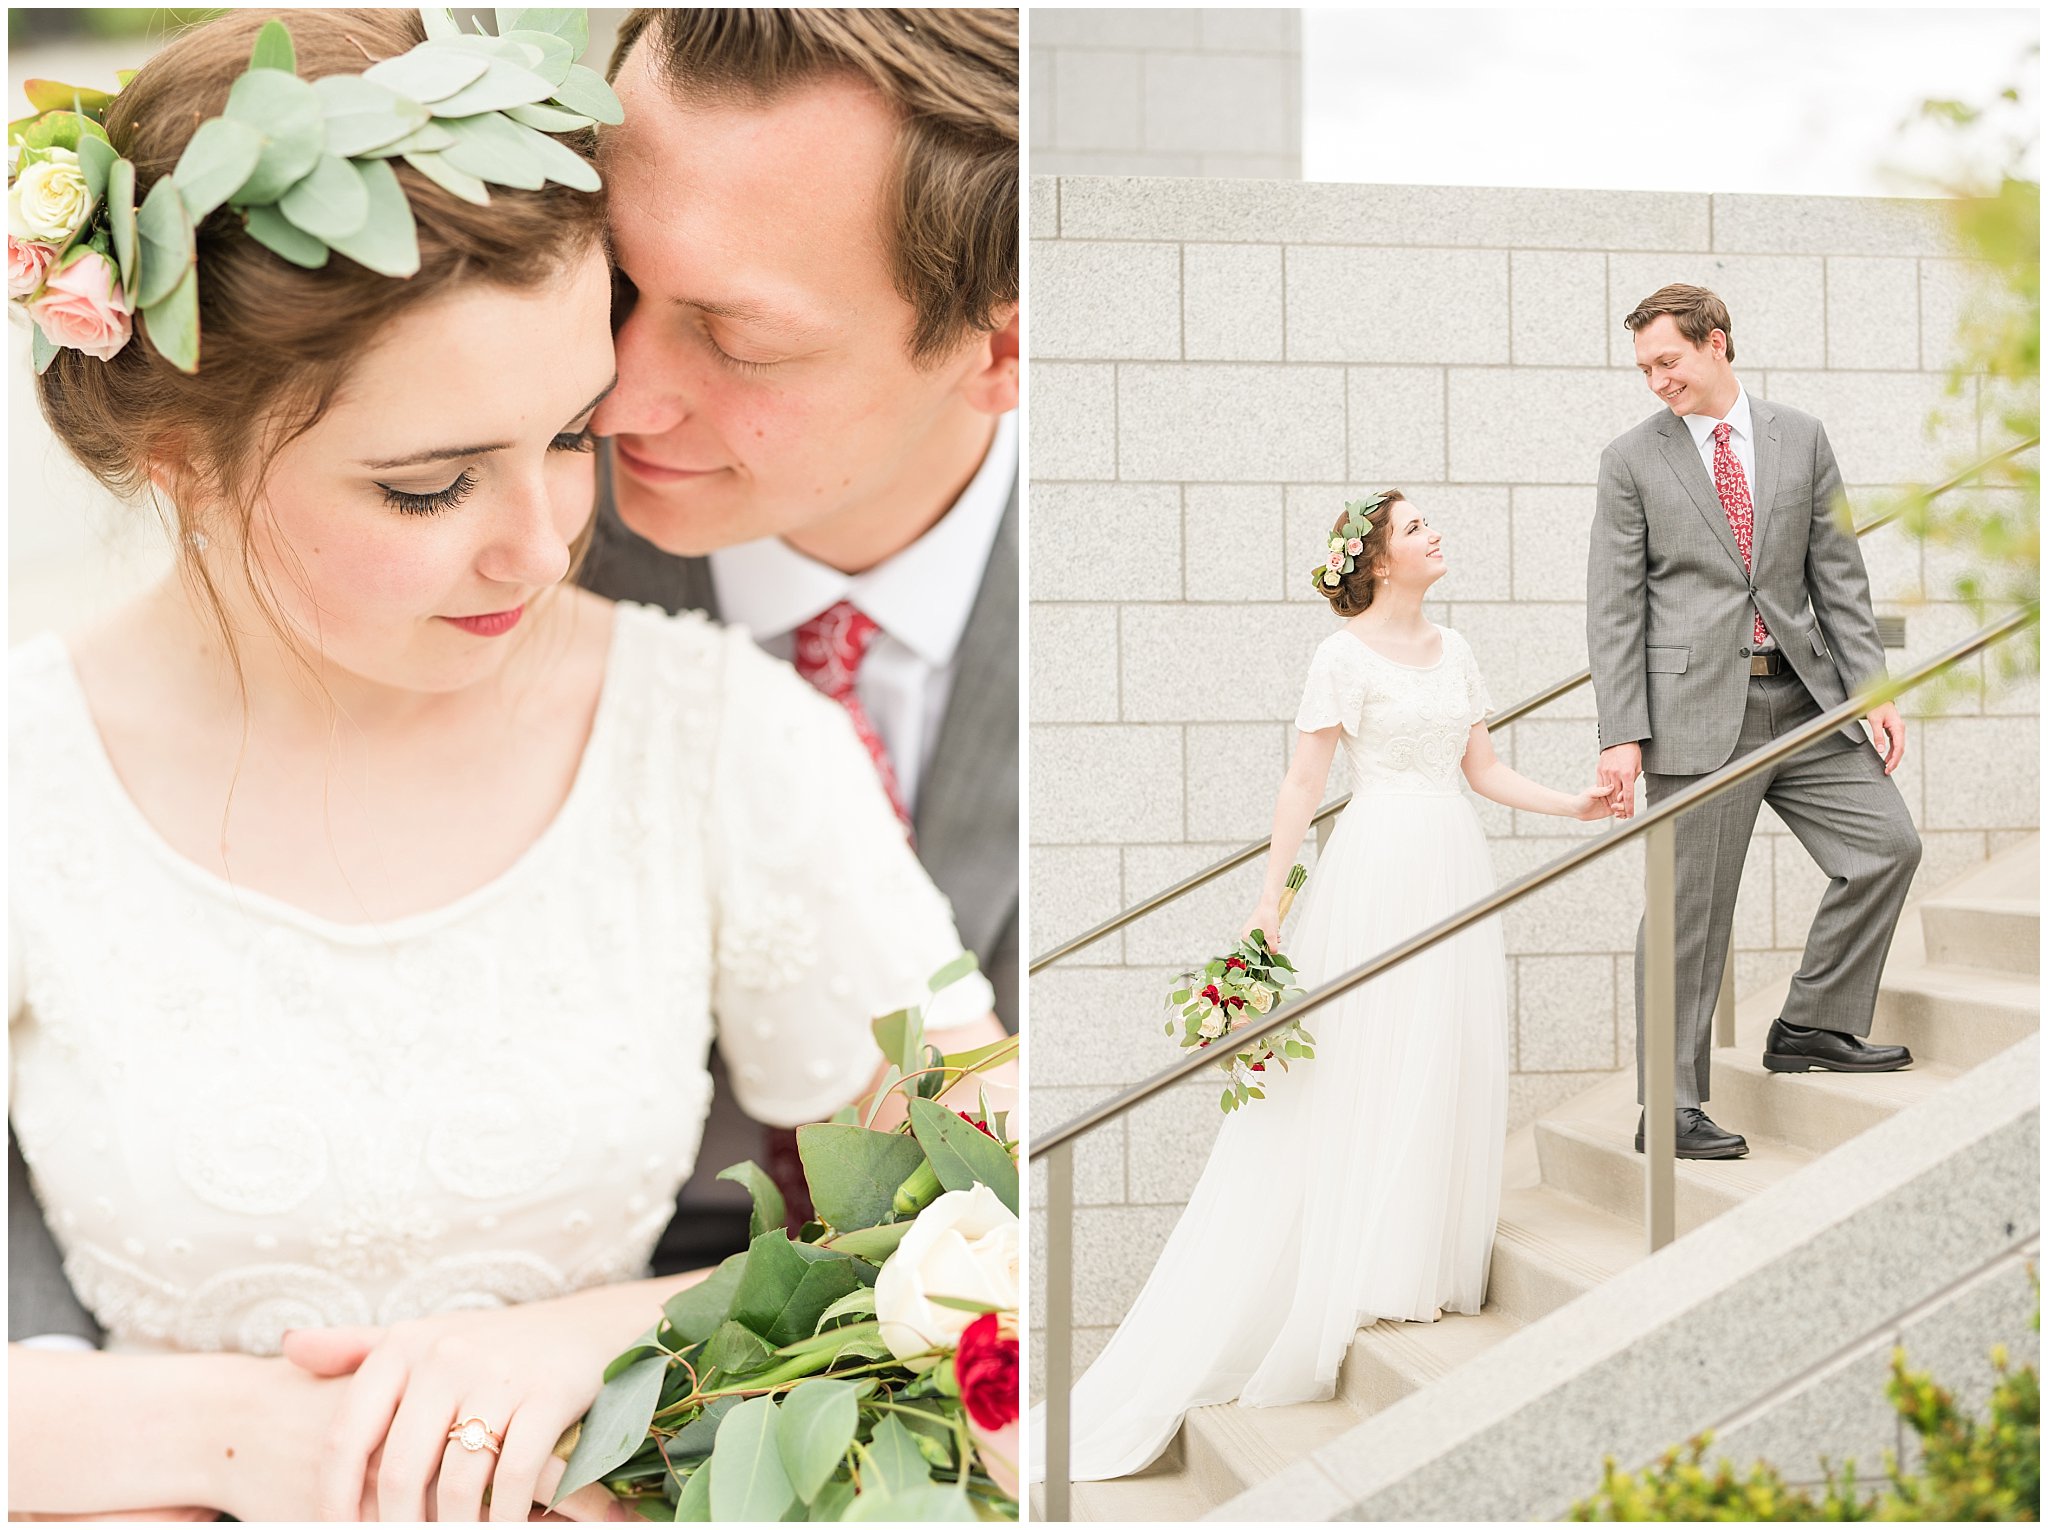 Bride in flower crown and groom in grey suit with maroon tie | Grey, gold, and maroon wedding colors | Draper Temple Spring Formal Session | Jessie and Dallin Photography